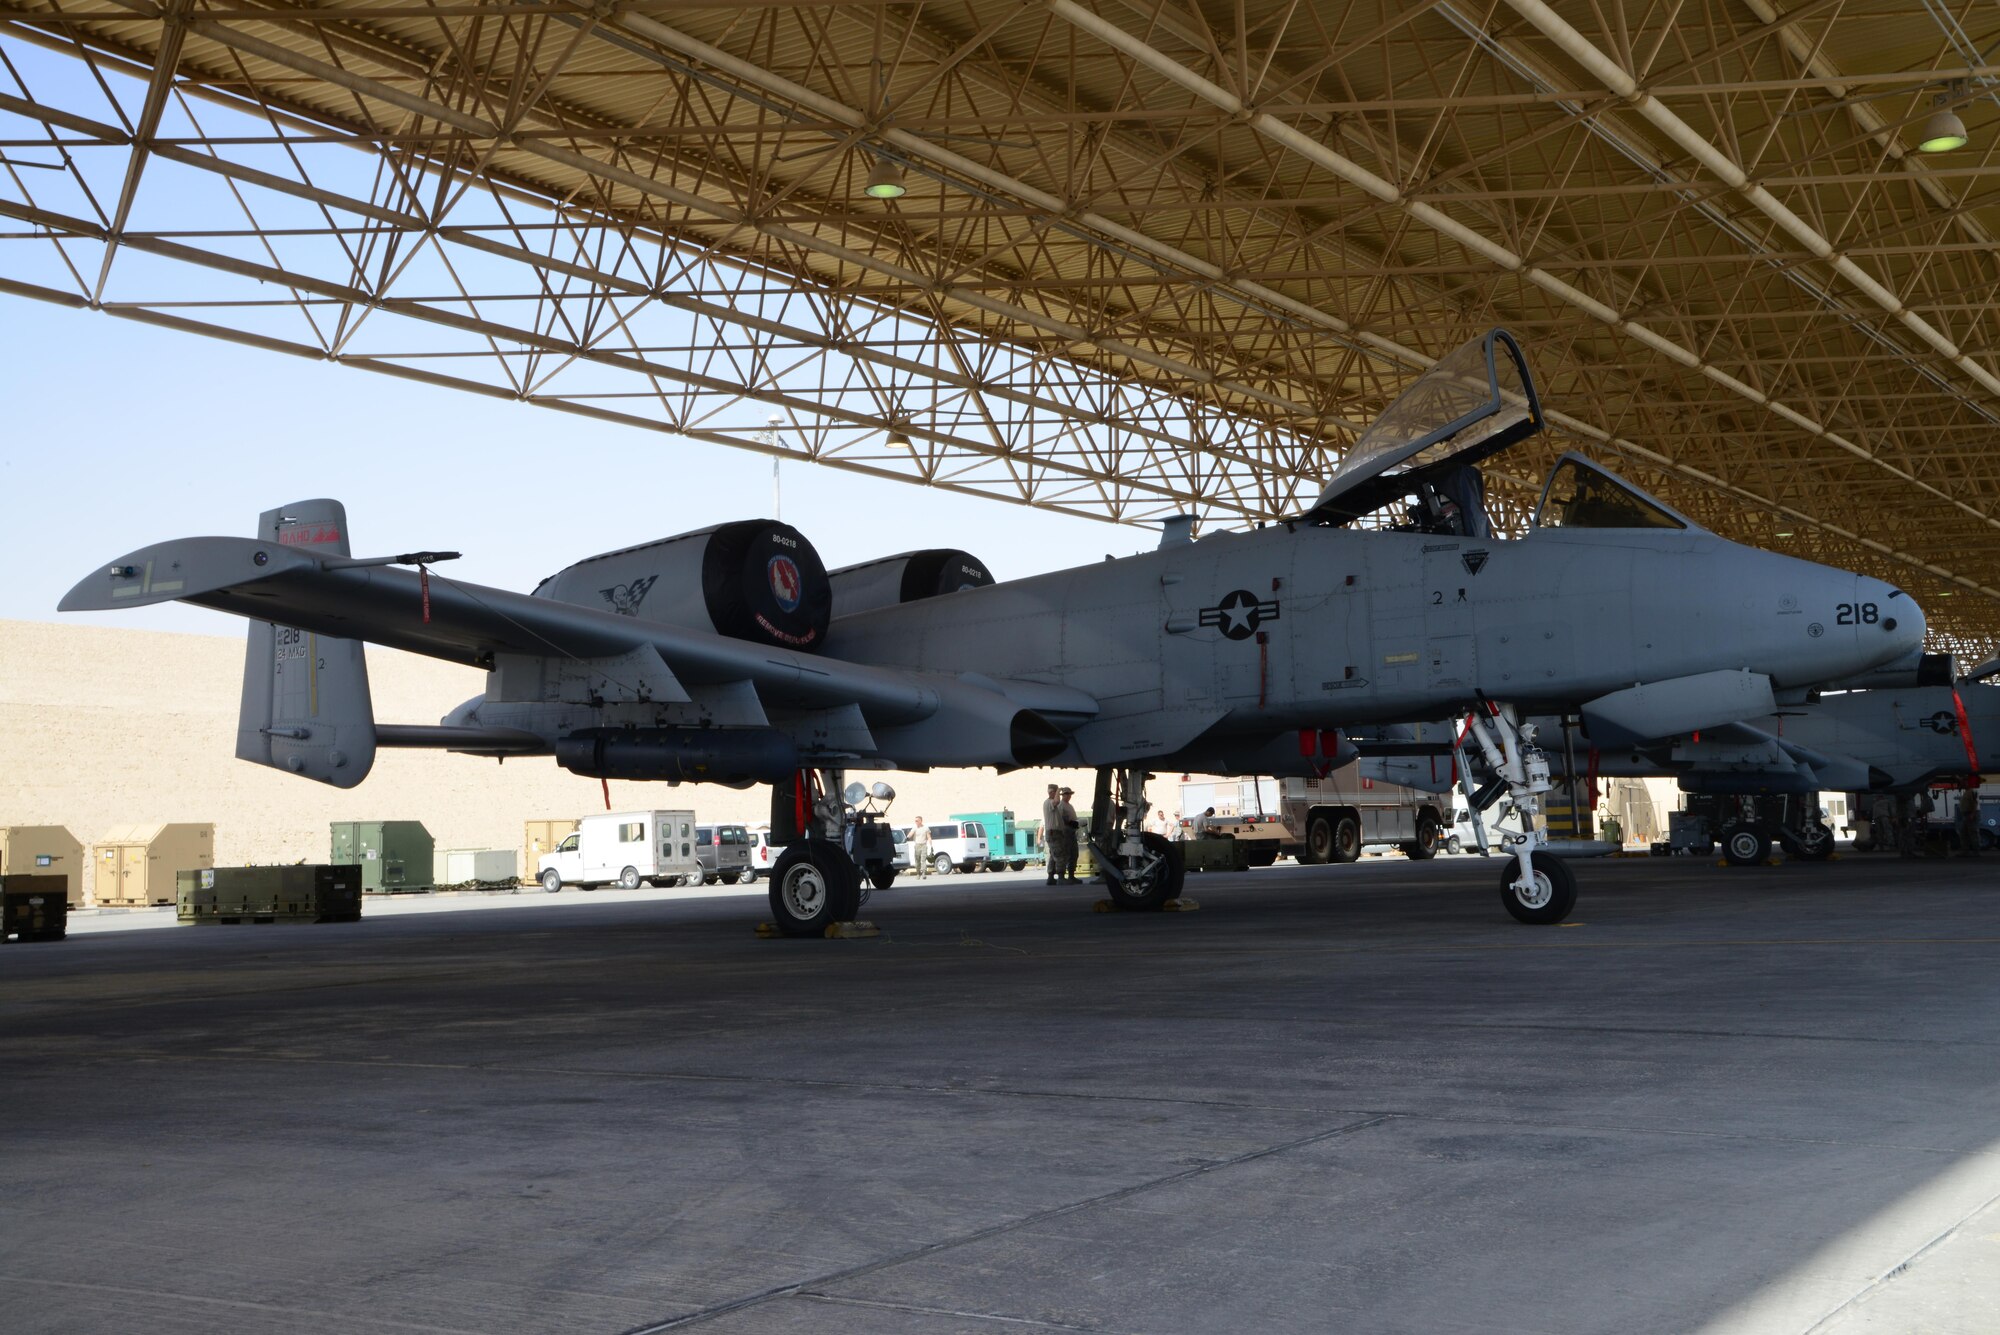 An A-10 Thunderbolt is parked underneath a sunshade, March 2, 2015, at Al Udeid Air Base, Qatar. A contingent of six A-10 Thunderbolts and more than 120 personnel assigned to the 190th Expeditionary Fighter Squadron recently arrived here to participate in three major coalition exercises in the region. (U.S. Air Force photo by Senior Airman Kia Atkins)